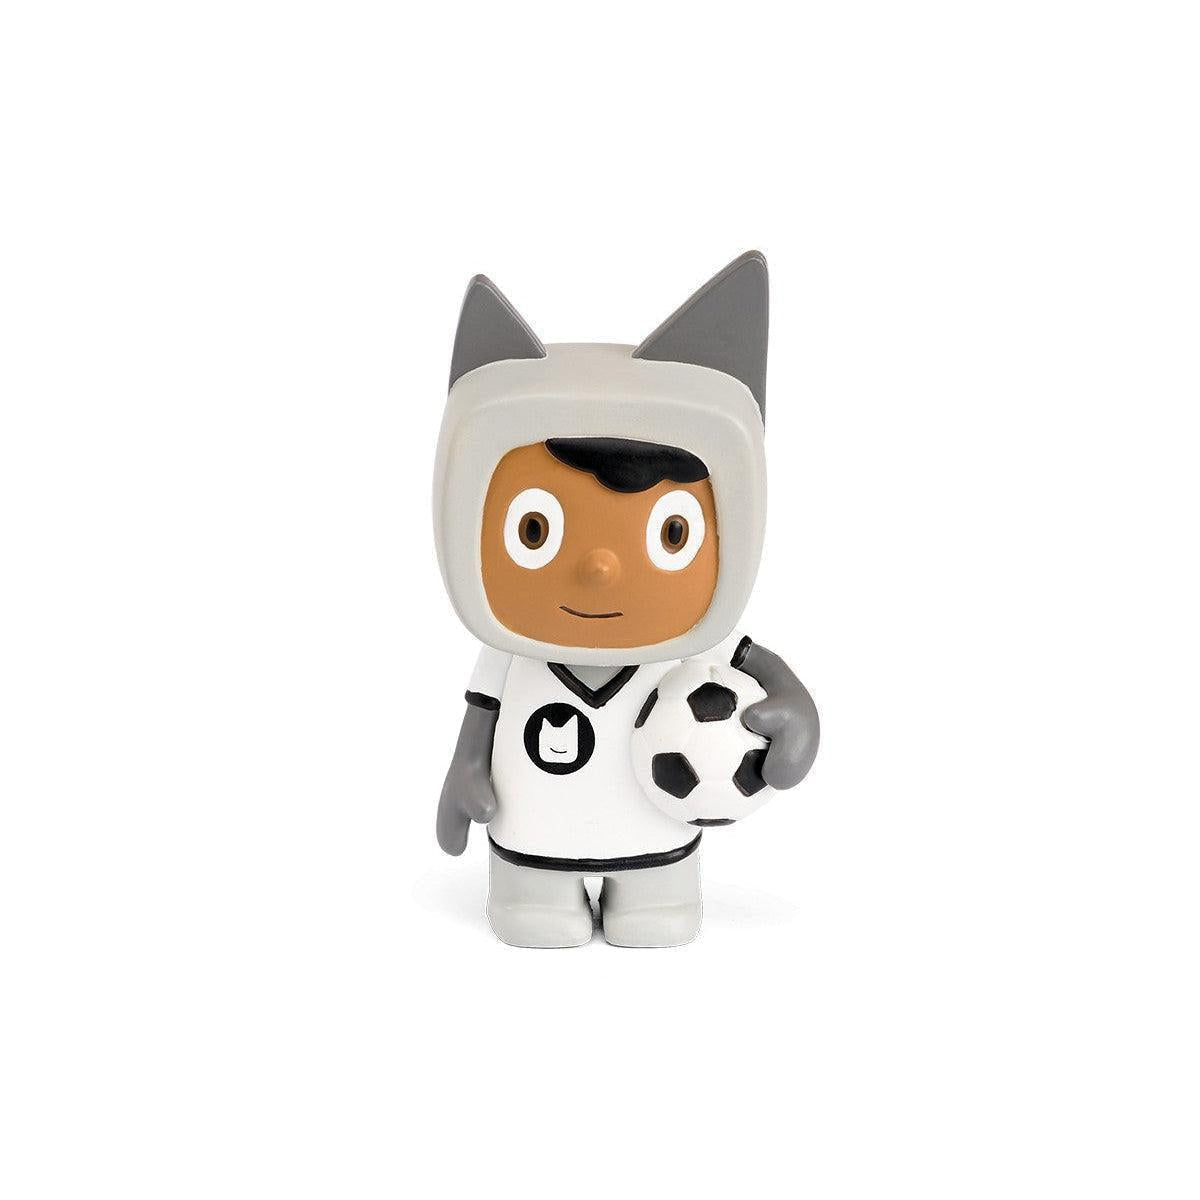 Creative Tonie Footballer - Audio Character for use with Toniebox Player with Space for up to 90 Minutes of Customisable Content